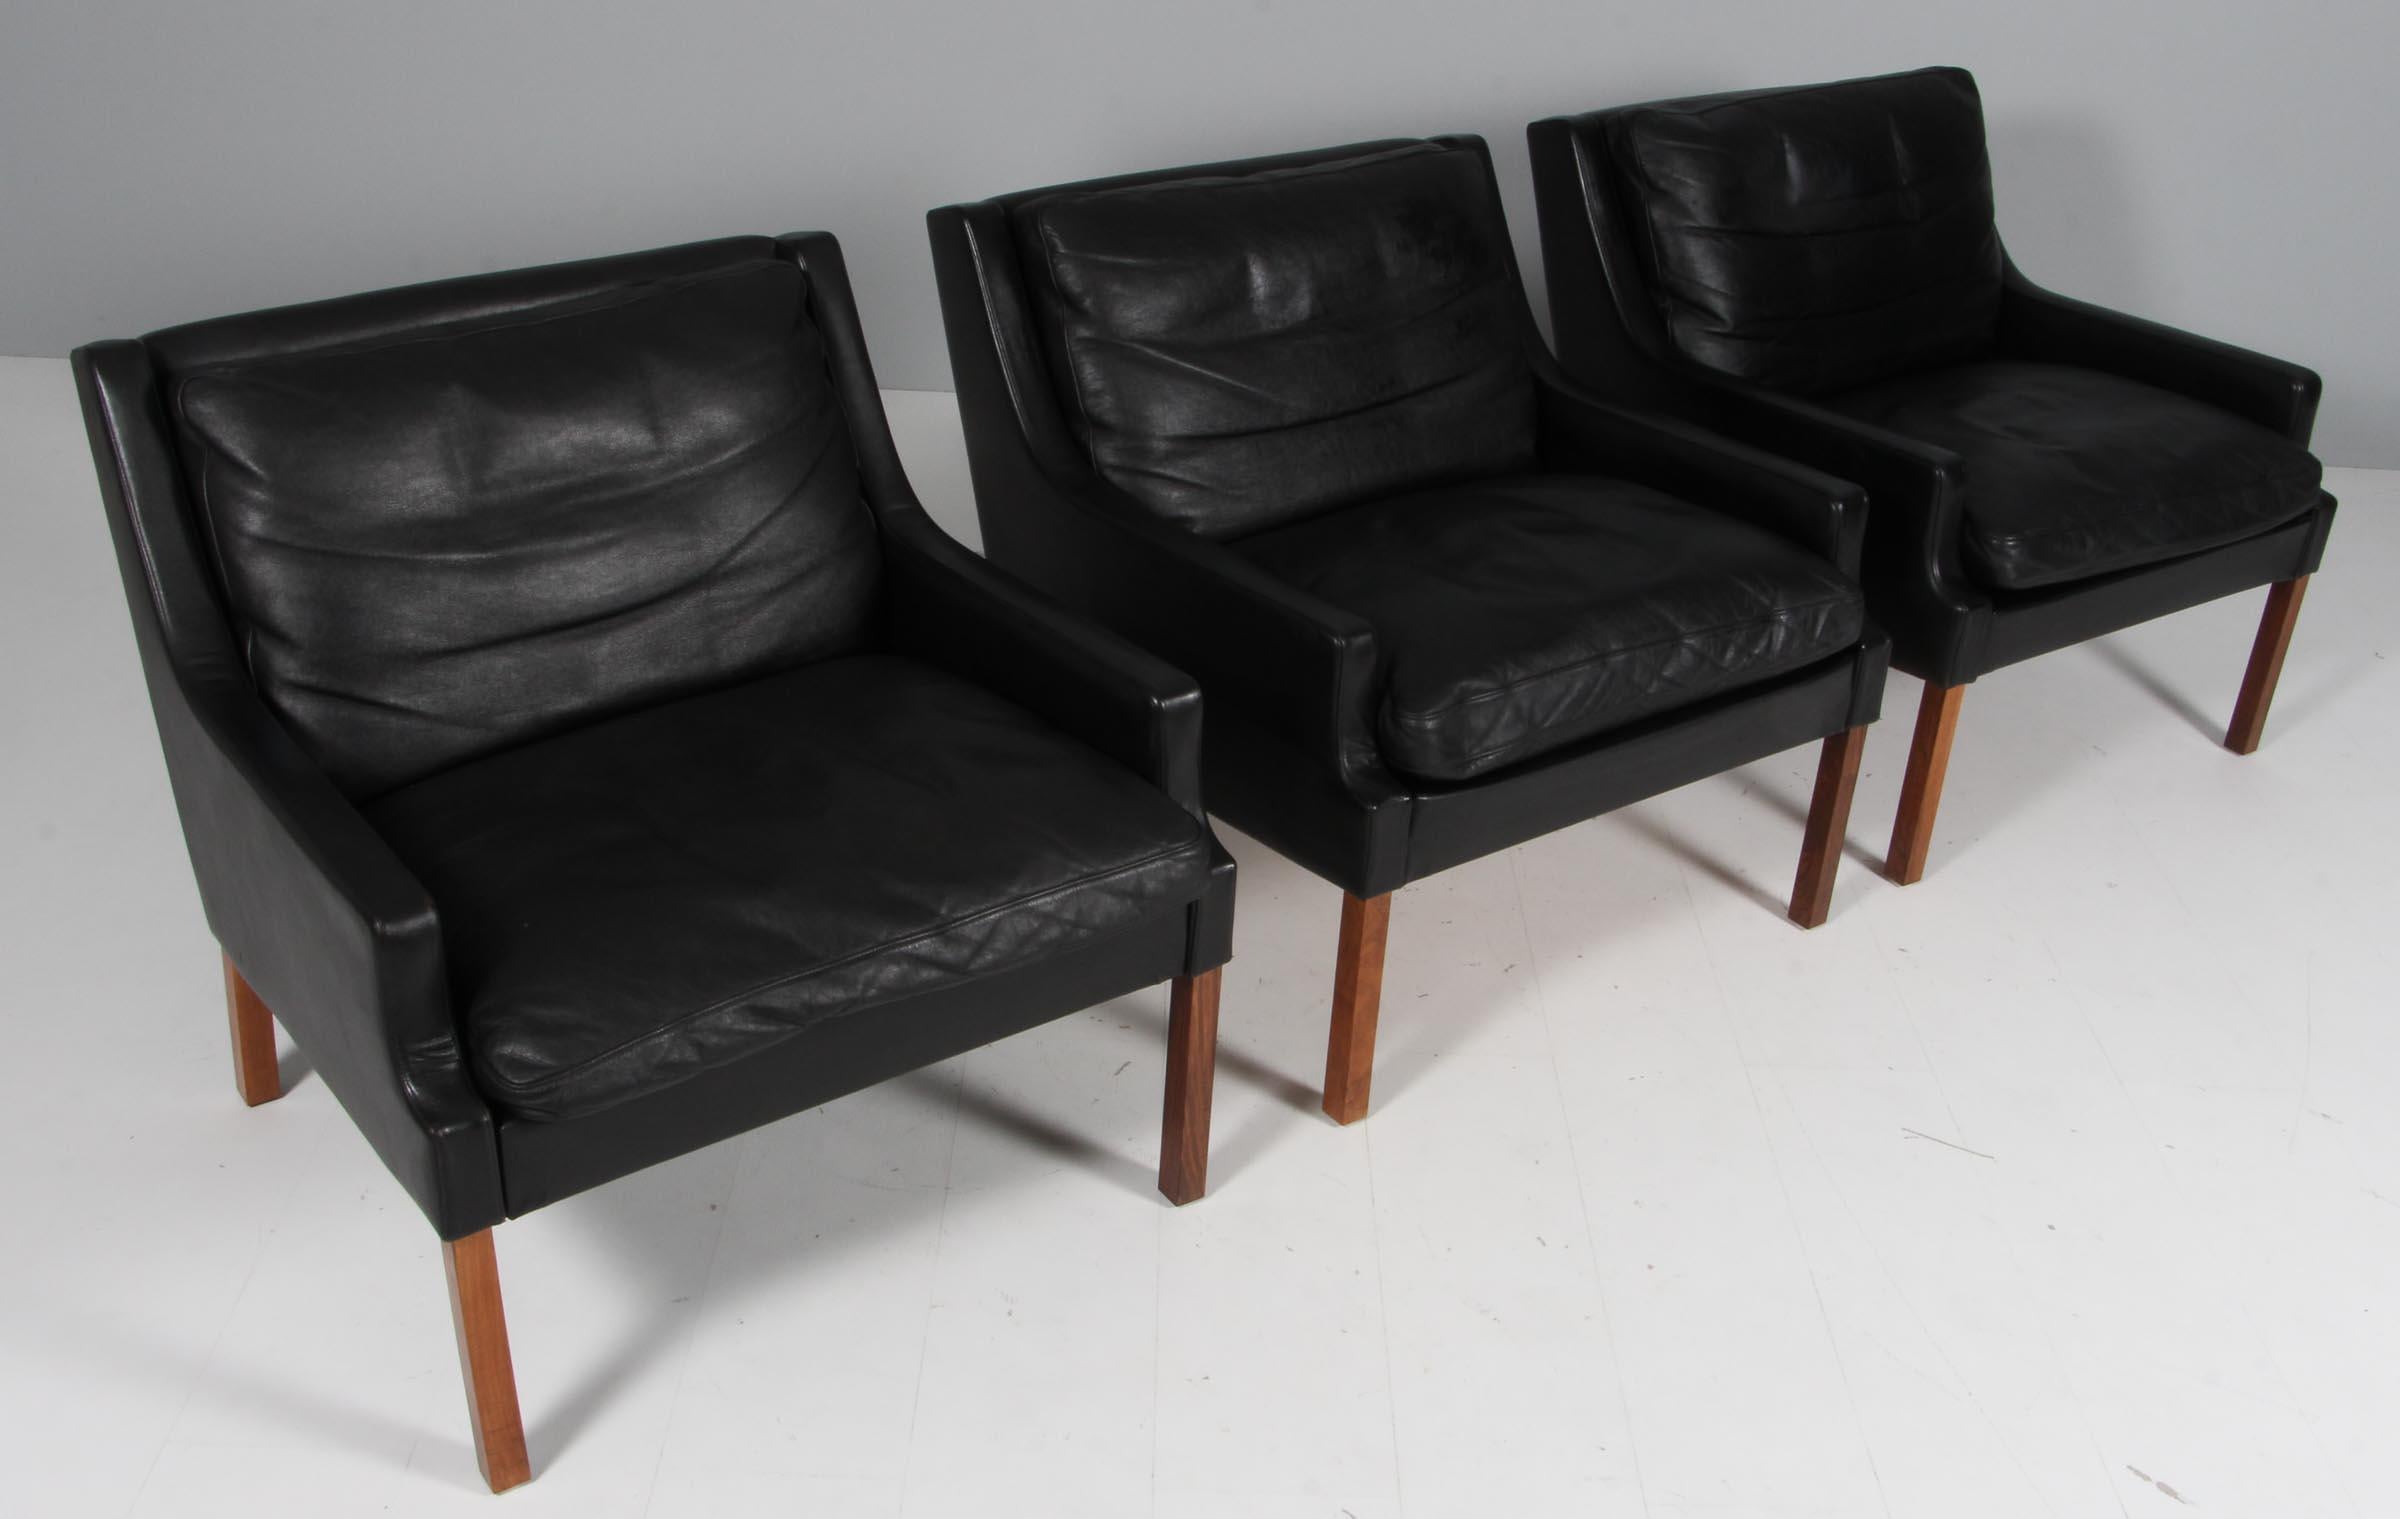 Rud Thygesen lounge chair with legs of rosewood.

Original duvet cushions with black light patinated leather. 

Made by Thams.